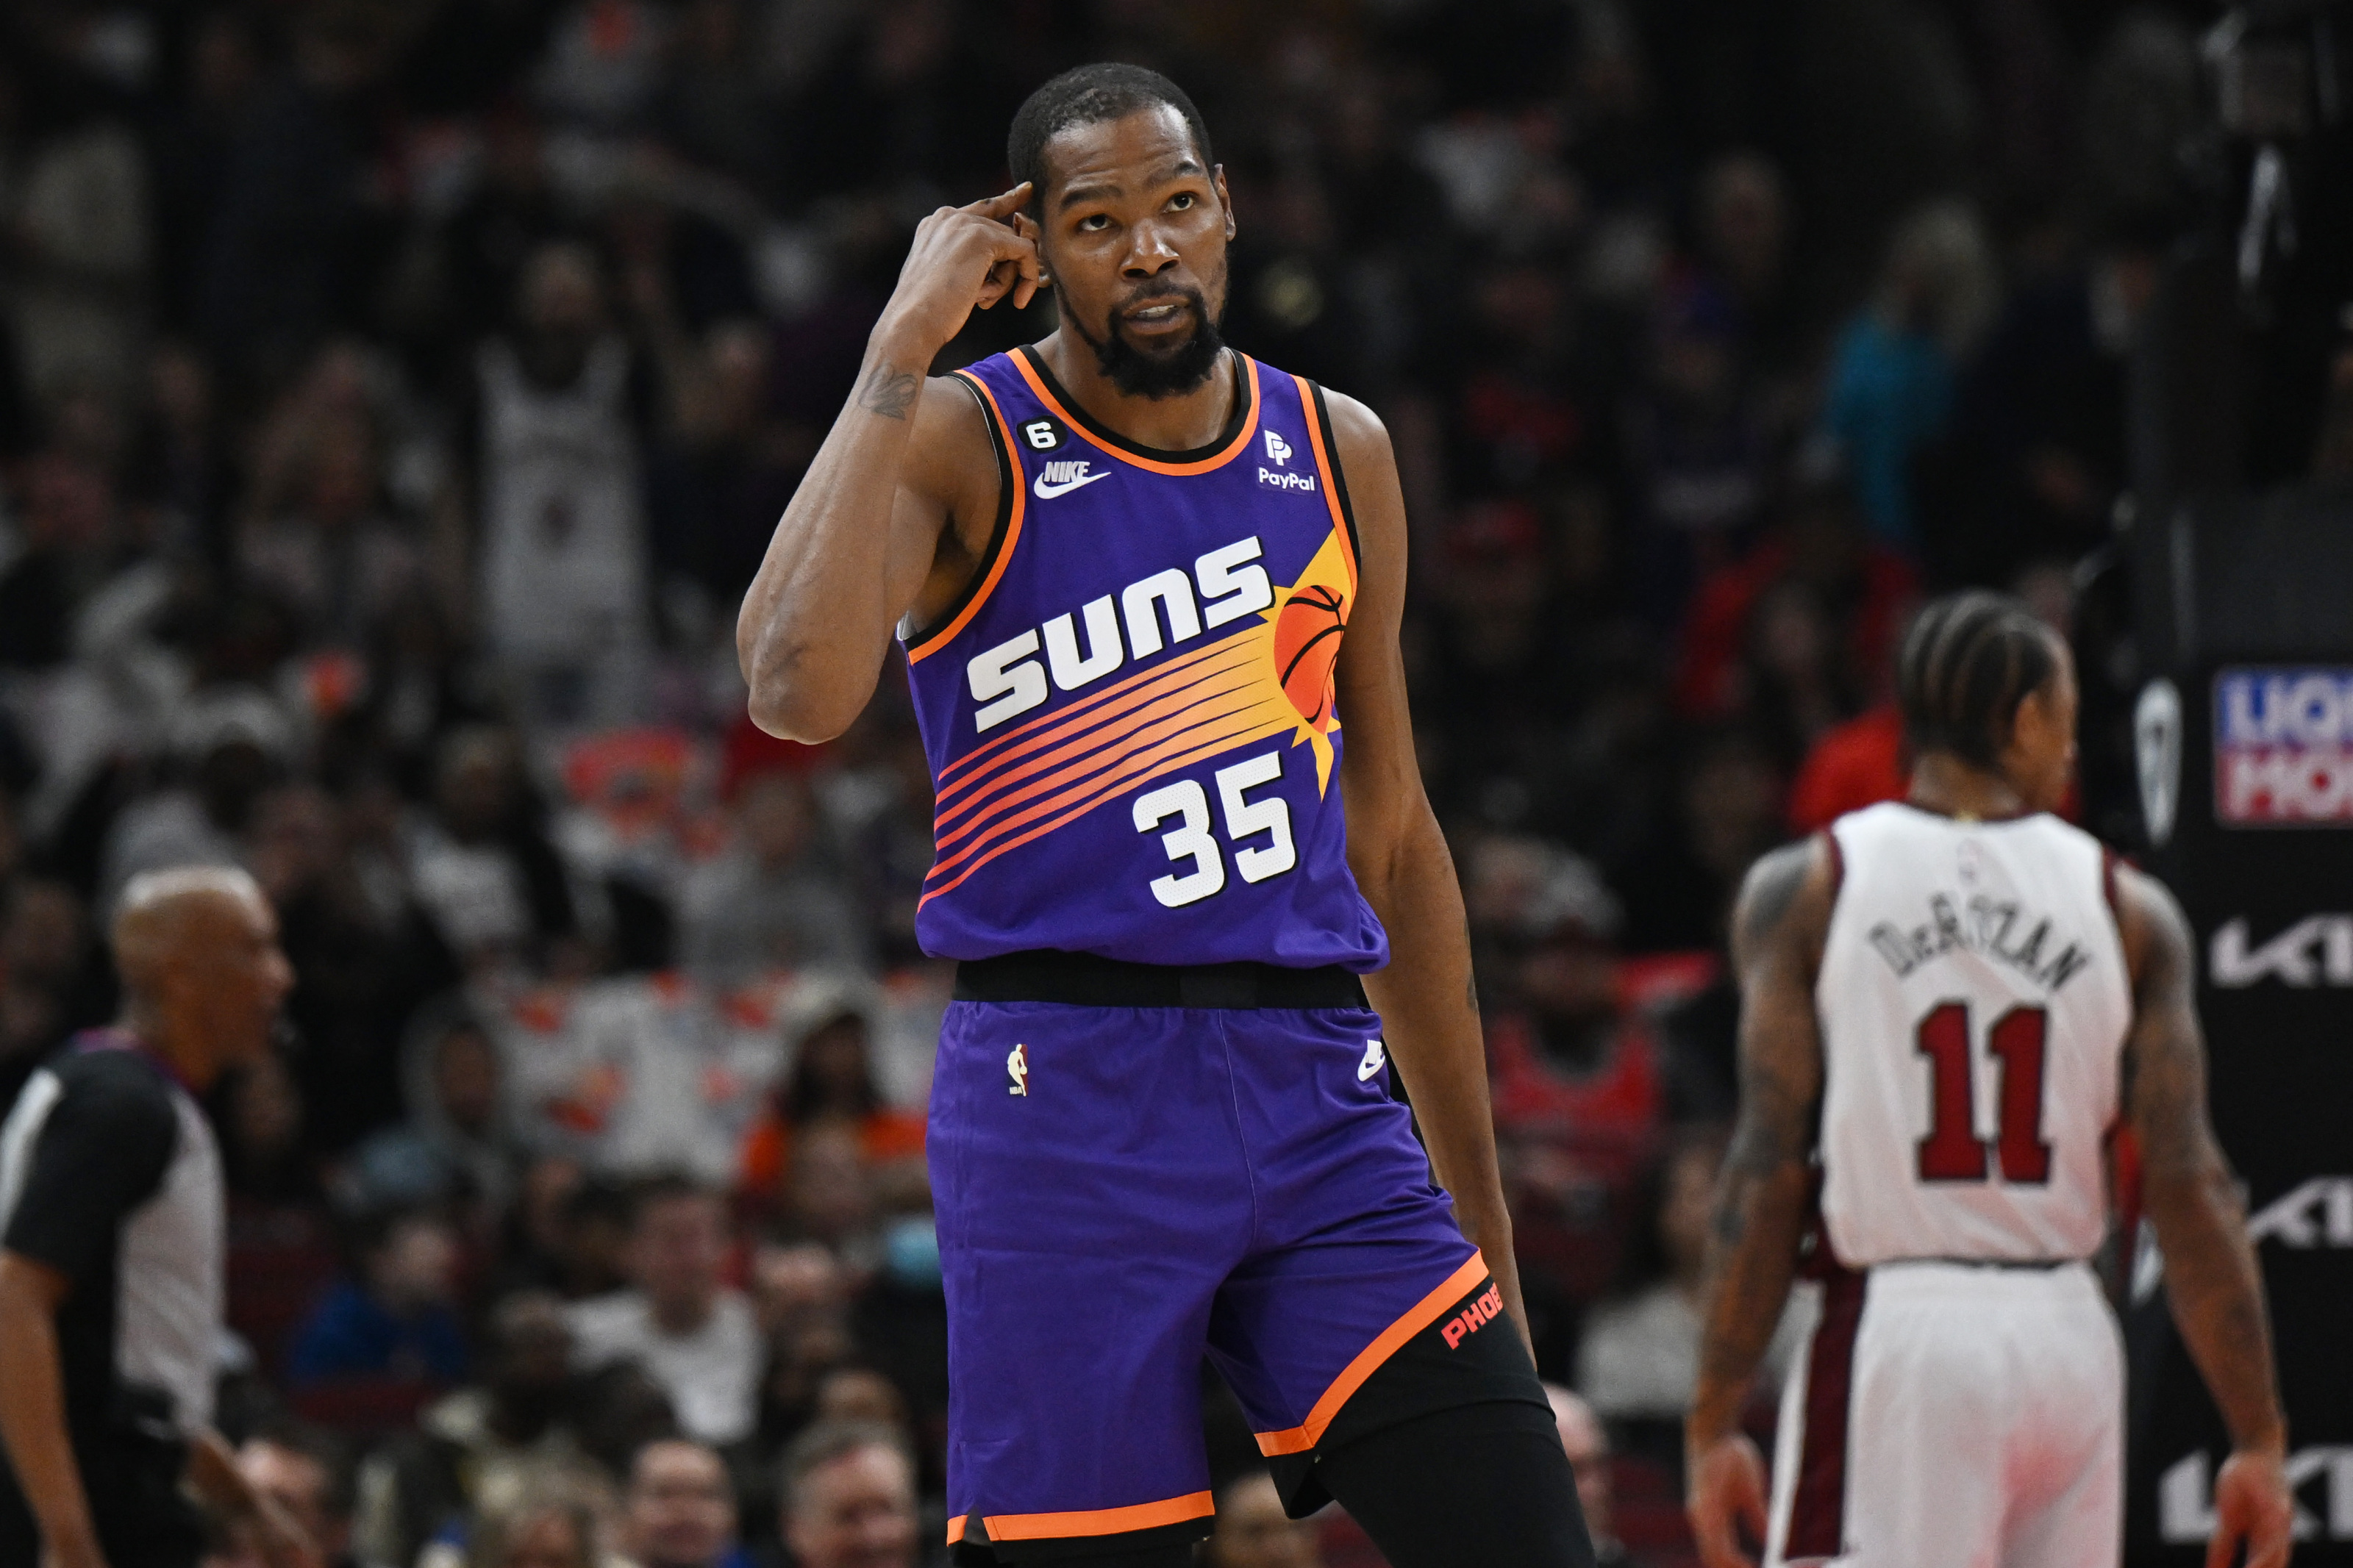 Hoops on X: If Kevin Durant is traded to Suns, we will buy person who  likes this tweet a PS5. Must be following  / X